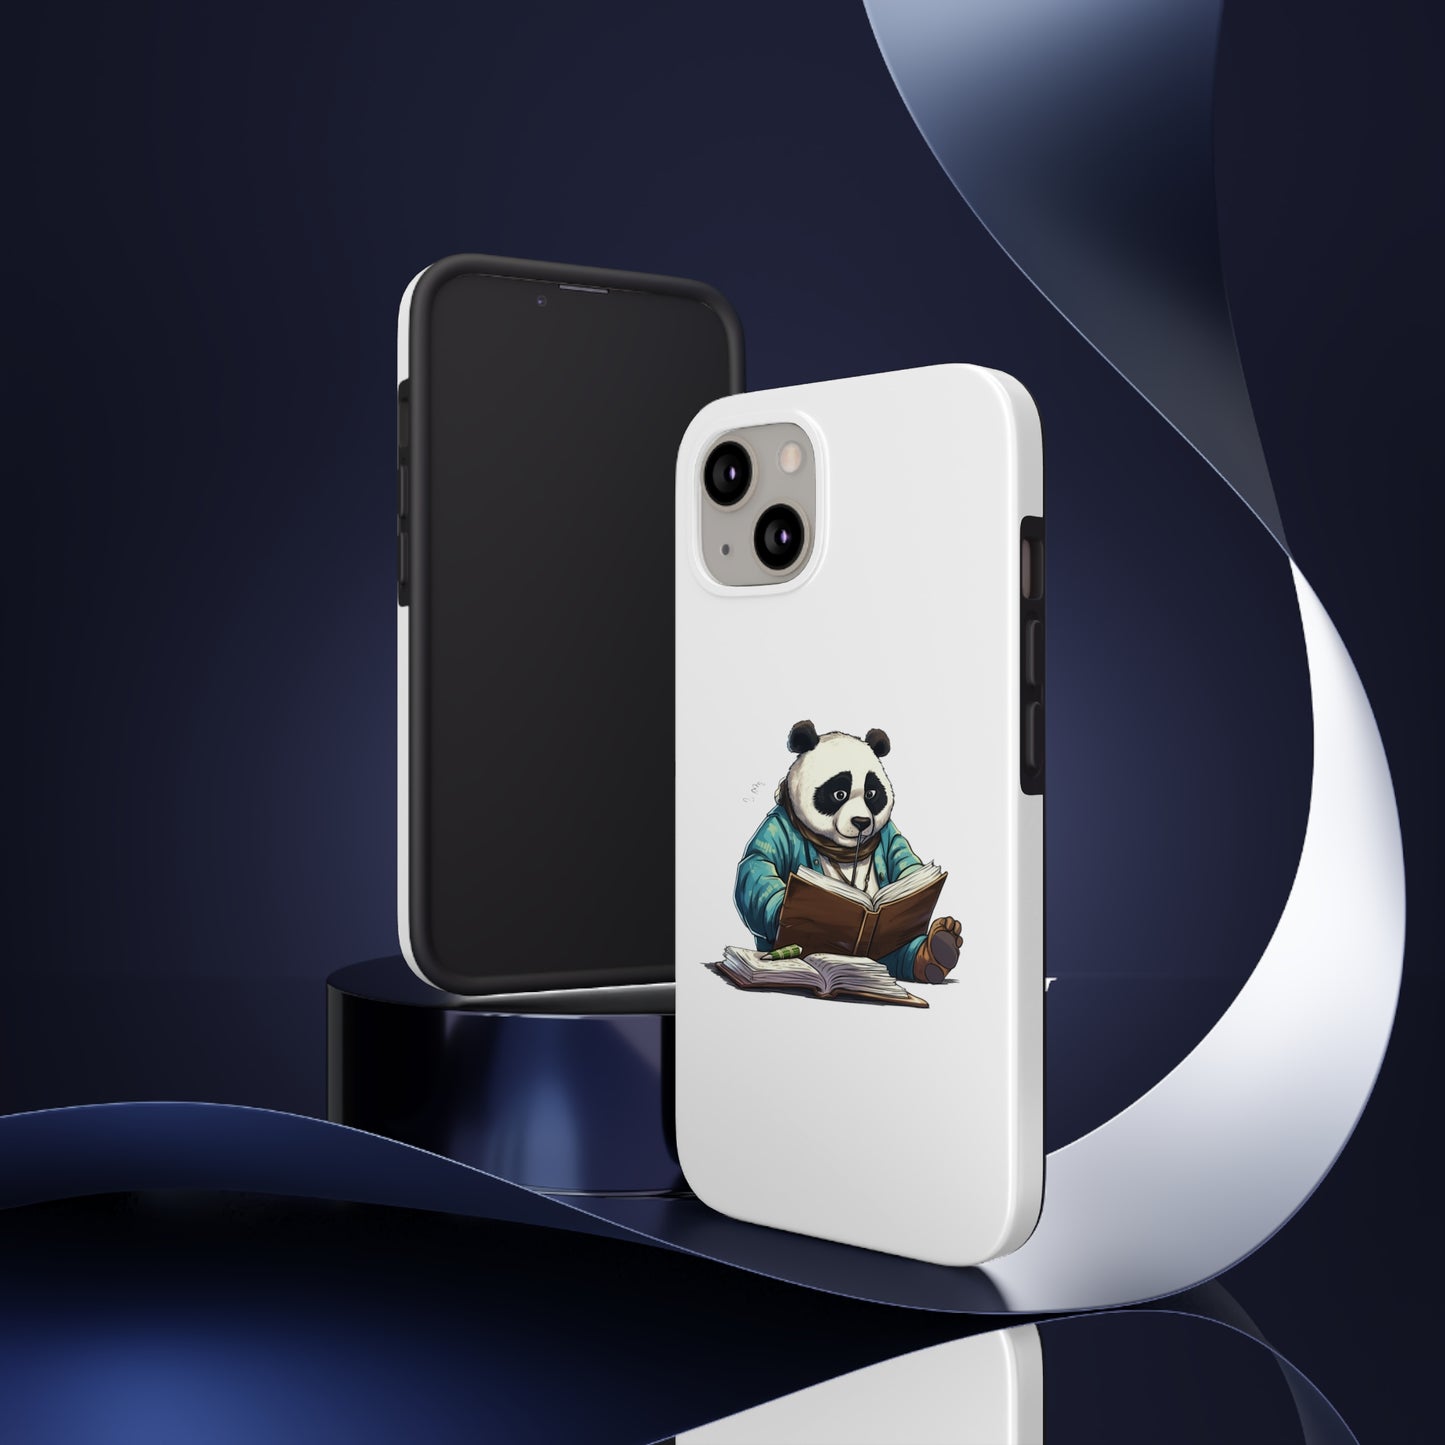 Phone Cases with a Studious Panda Engrossed in a Humorous Pun Book!